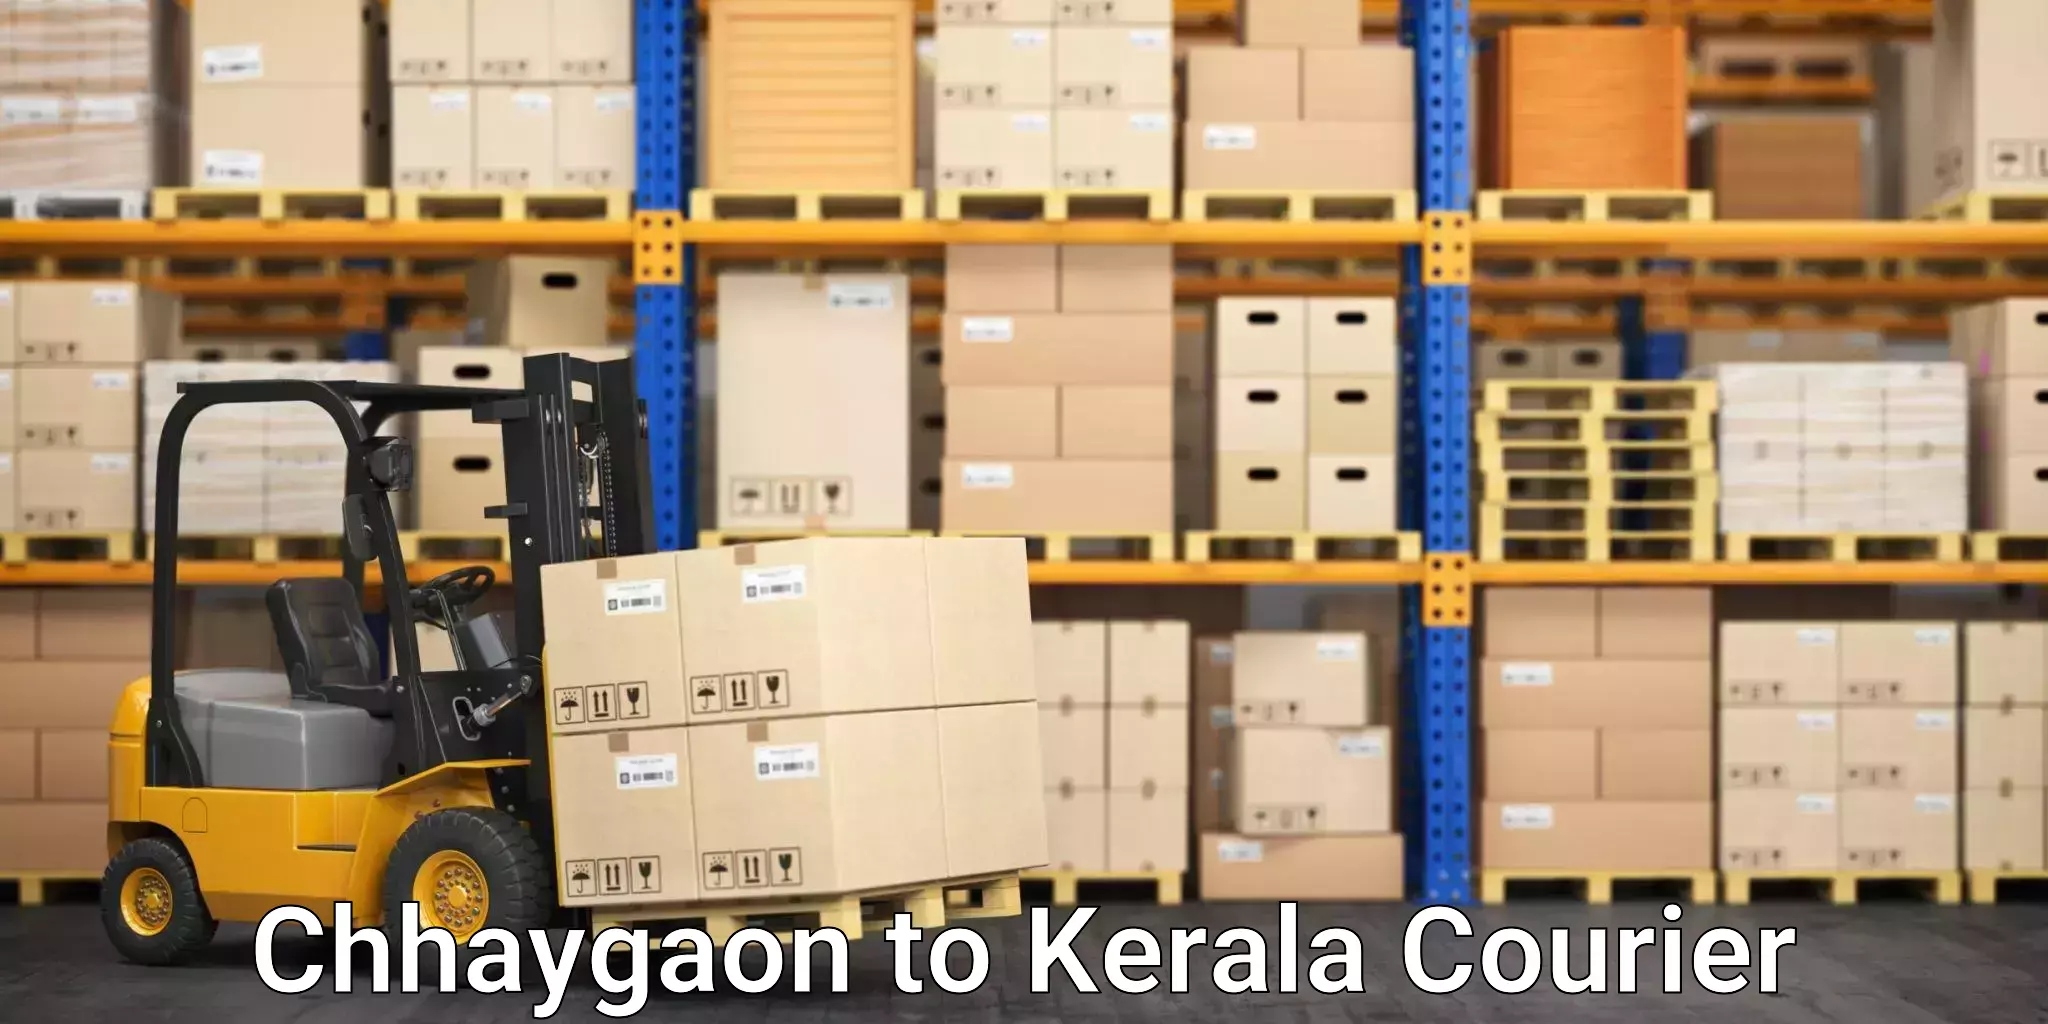 Expedited parcel delivery Chhaygaon to Kuthiathode